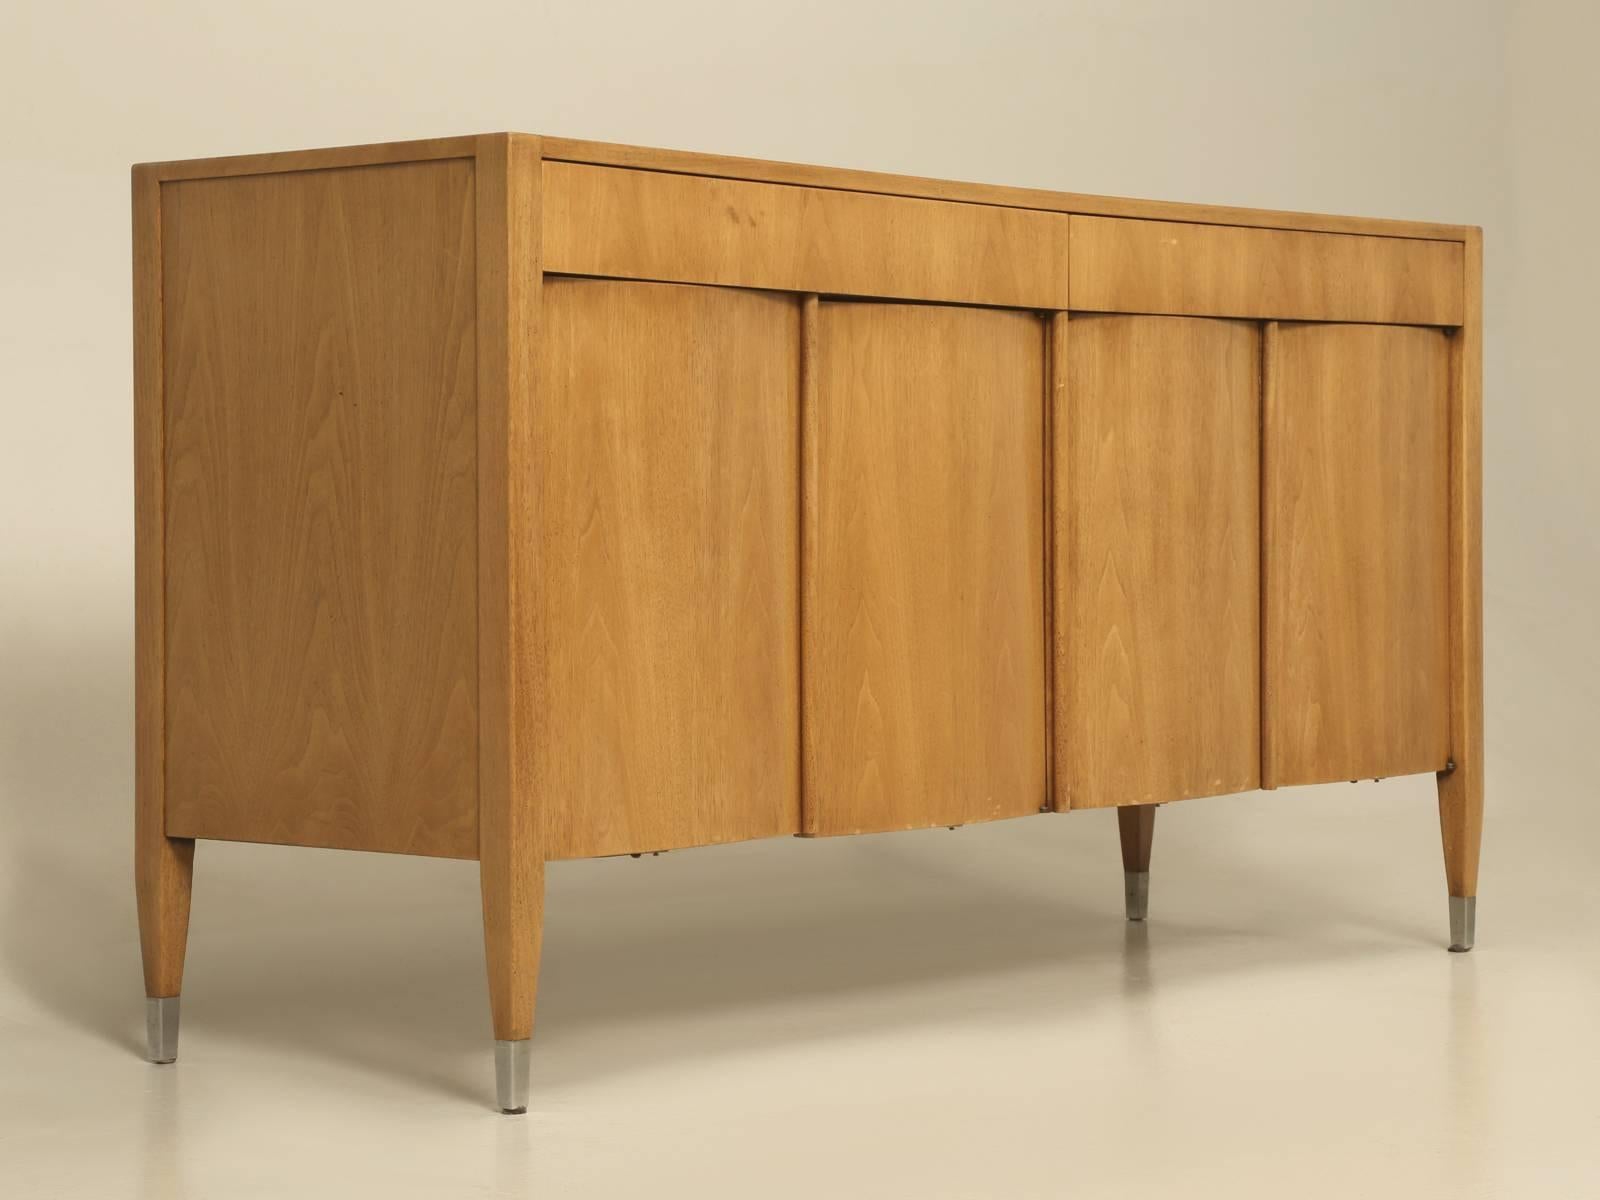 Manufactured by the Sligh Furniture Grand Rapids Chair Company in Michigan. This Mid-Century Modern buffet definitely has a hint of Scandinavia to it. Very nice original condition and had never been repaired or refinished. We have the matching